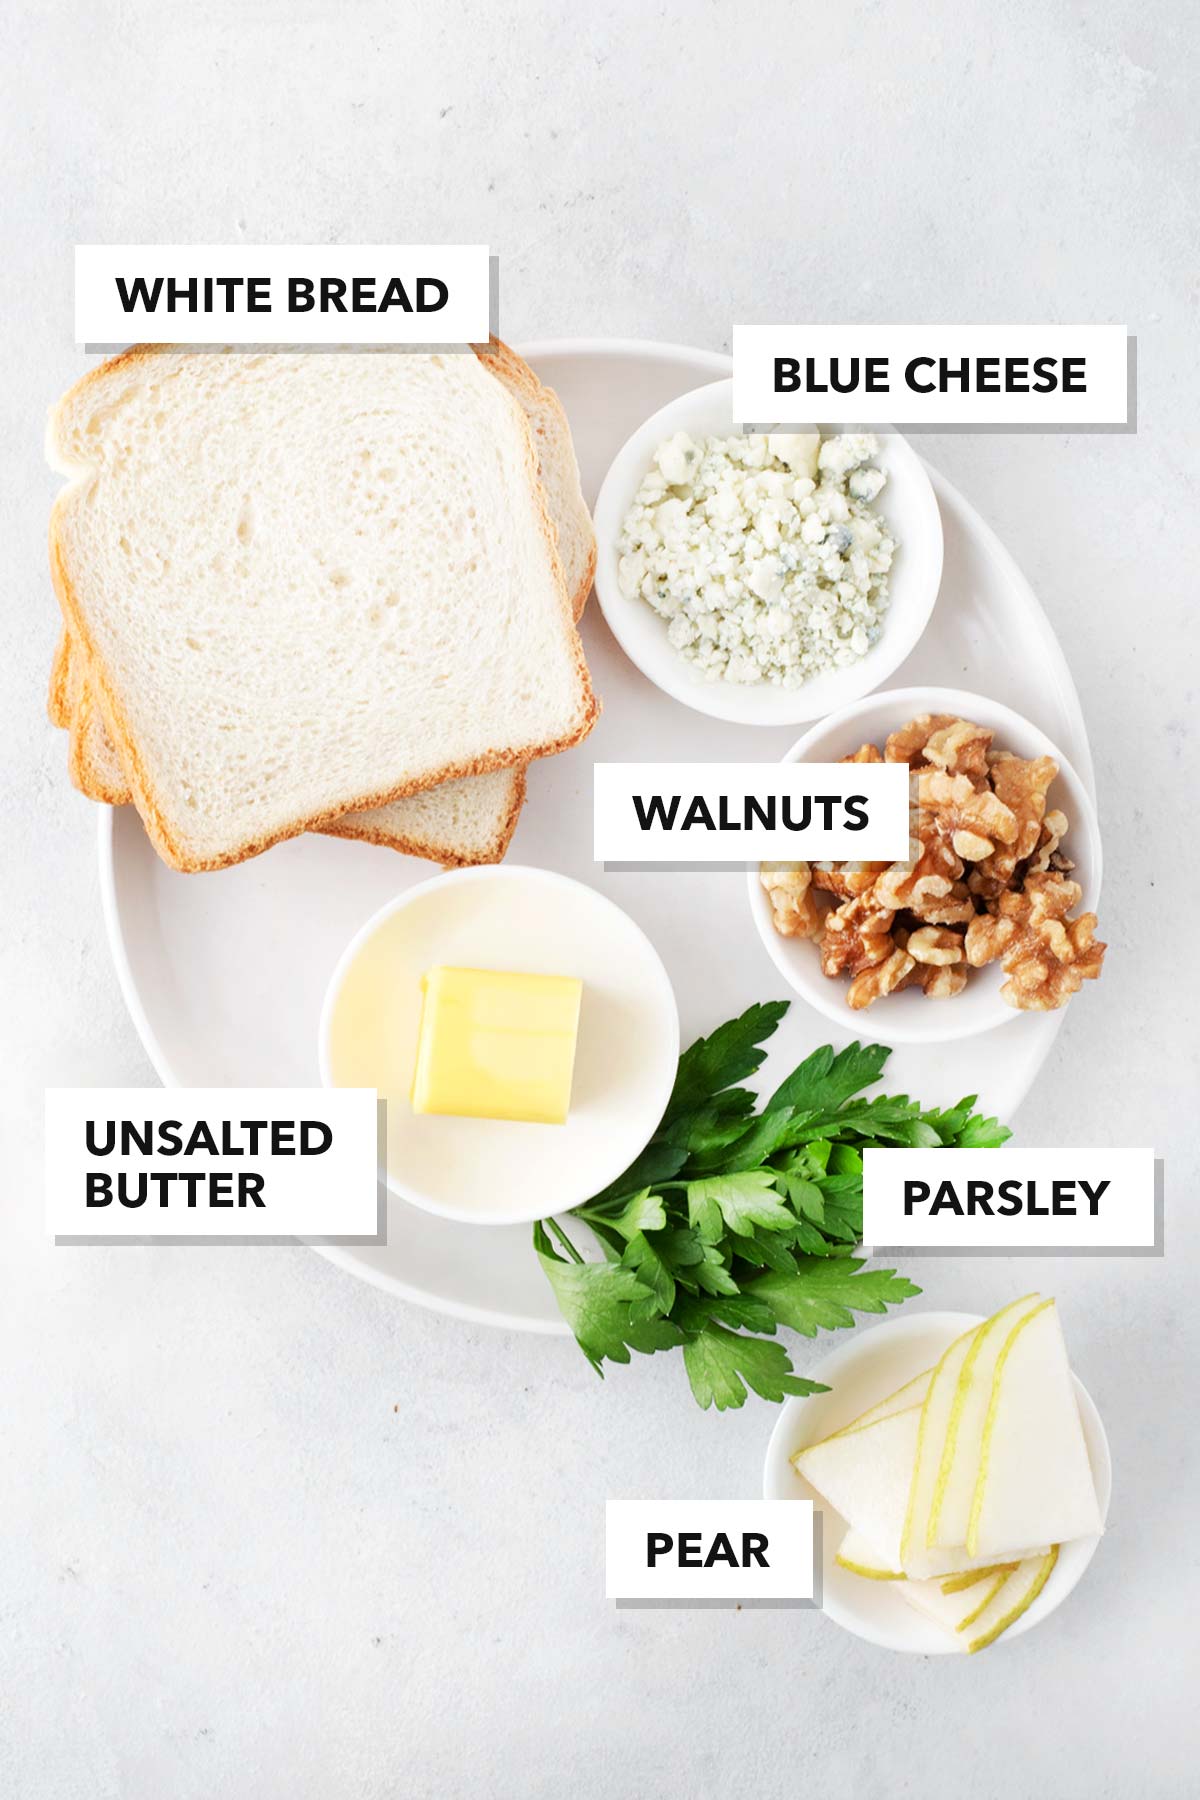 Ingredients for Blue Cheese and Pear Tea Sandwiches measured in bowls on a plate.